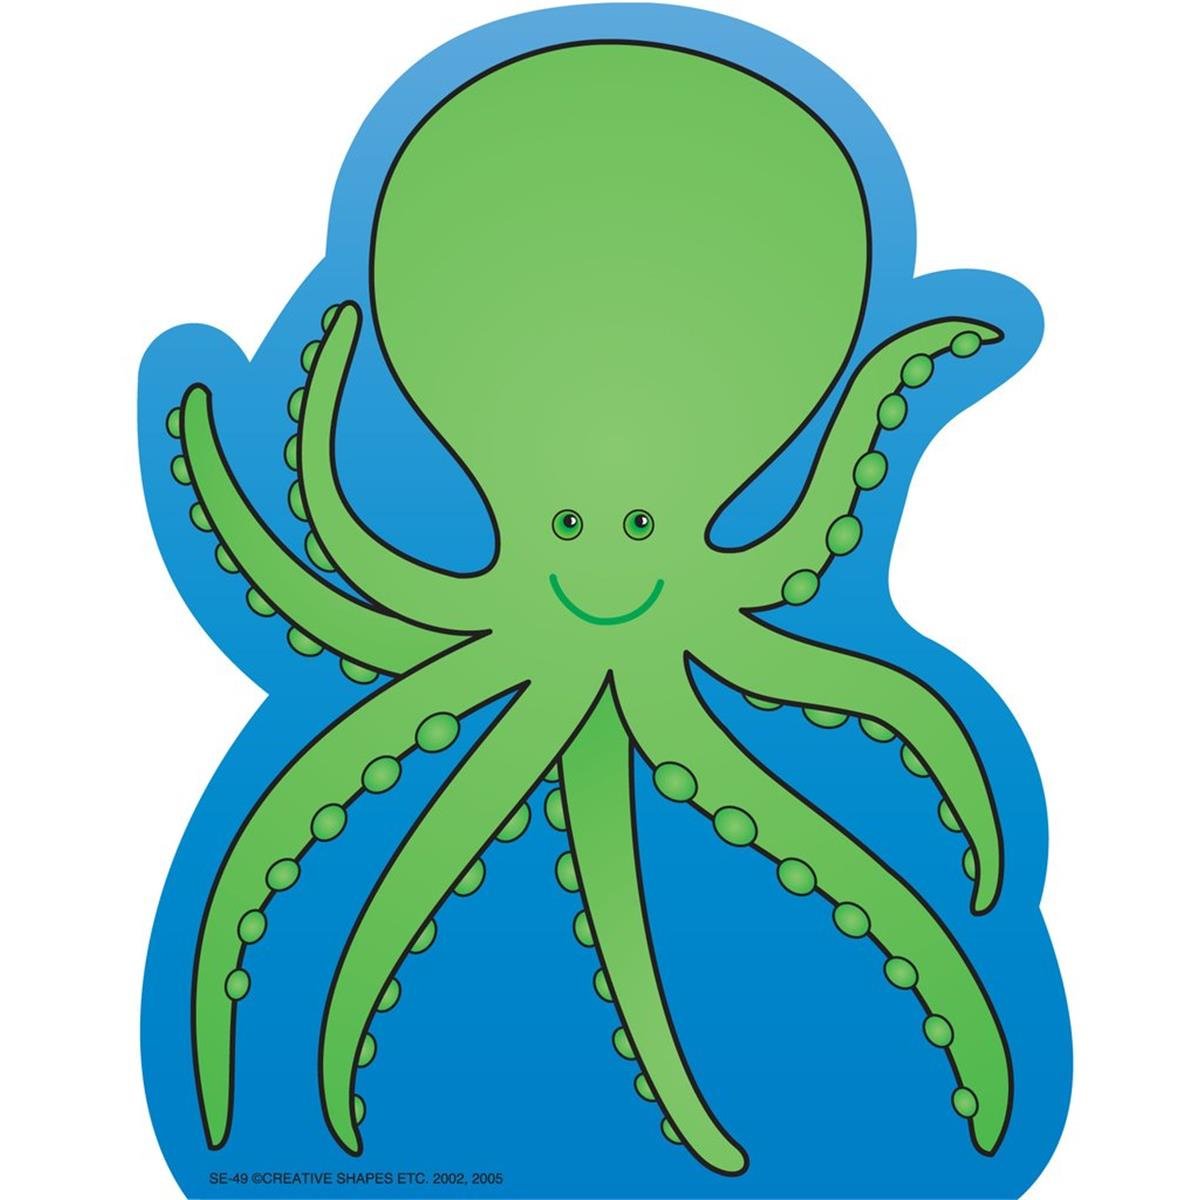 Se-0049 9 X 6 In. Large Notepad, Octopus - 50 Sheets Per Pack